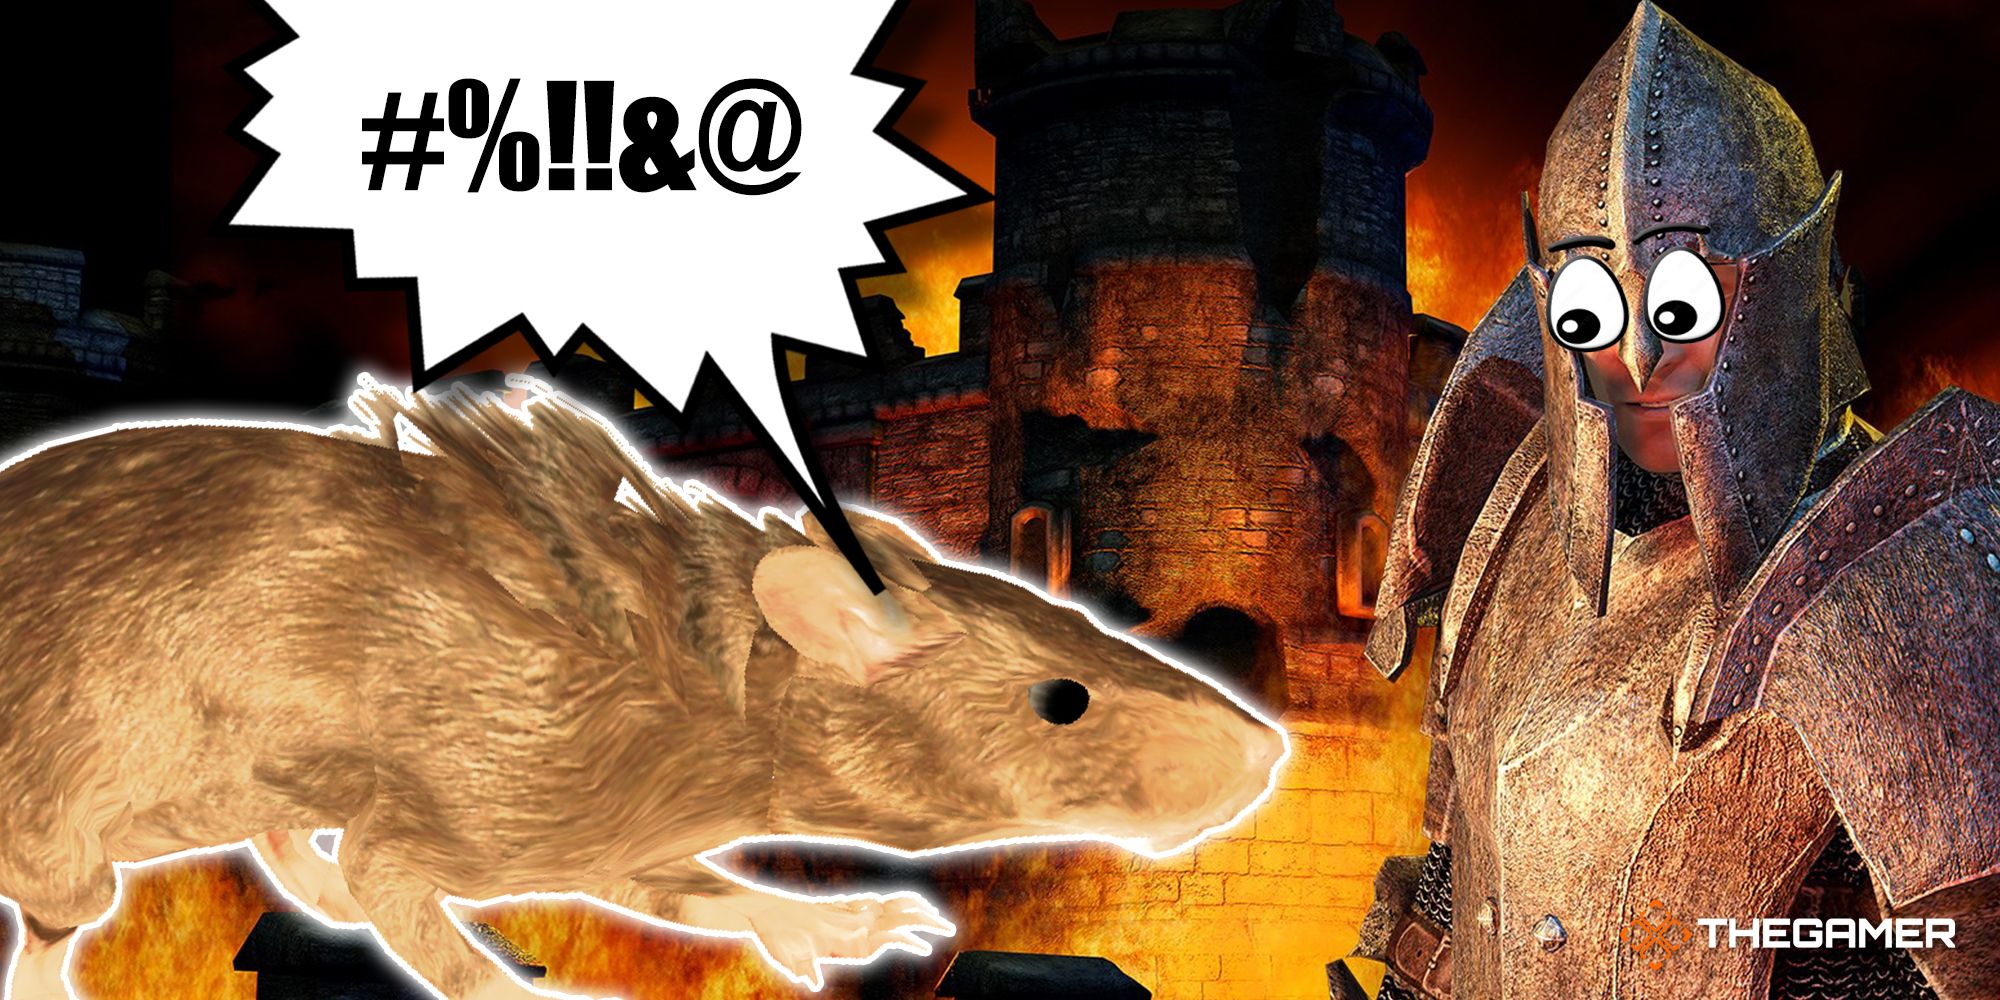 Image showing a sweary rat in front of background showing castle from Oblivion